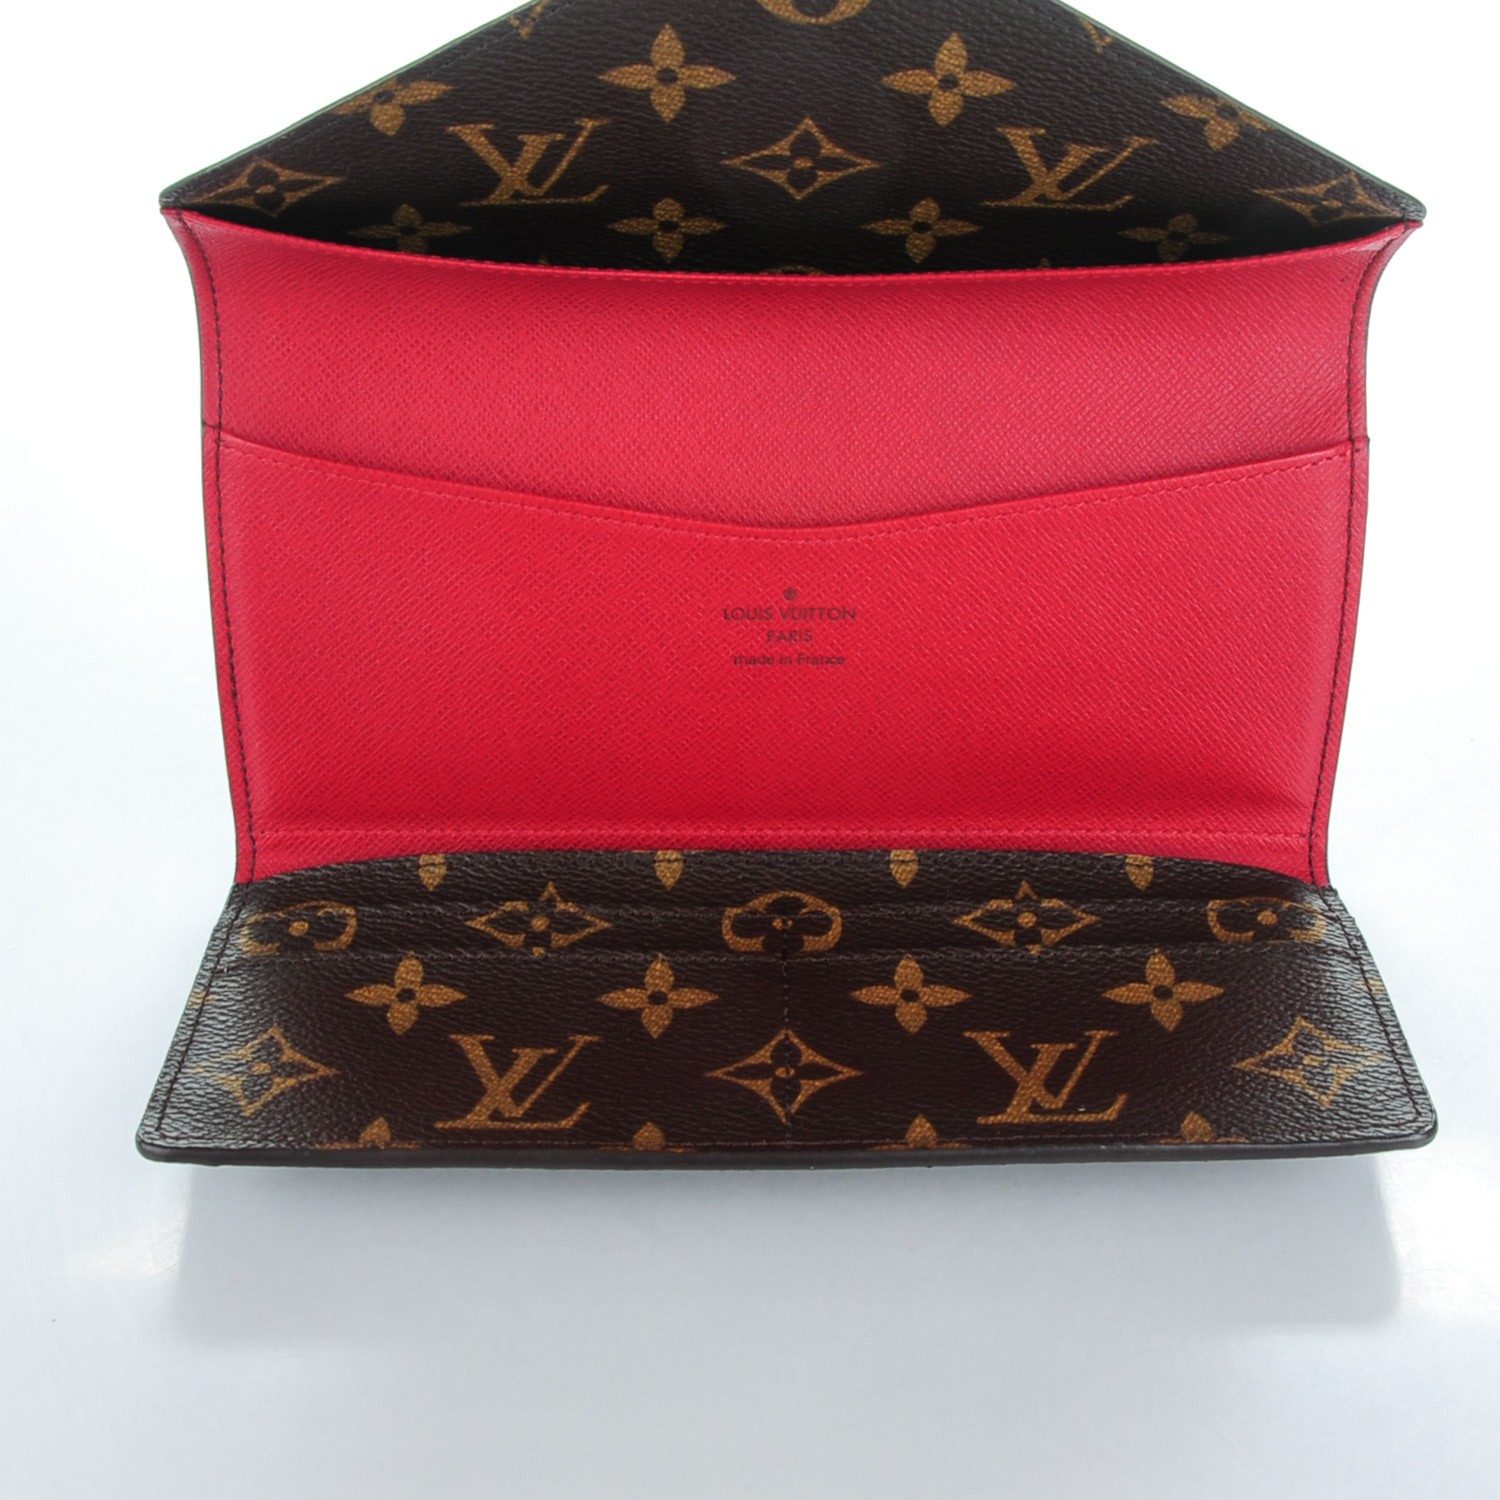 ✨LOUIS VUITTON✨ Josephine Wallet Selling $600 Discontinued in